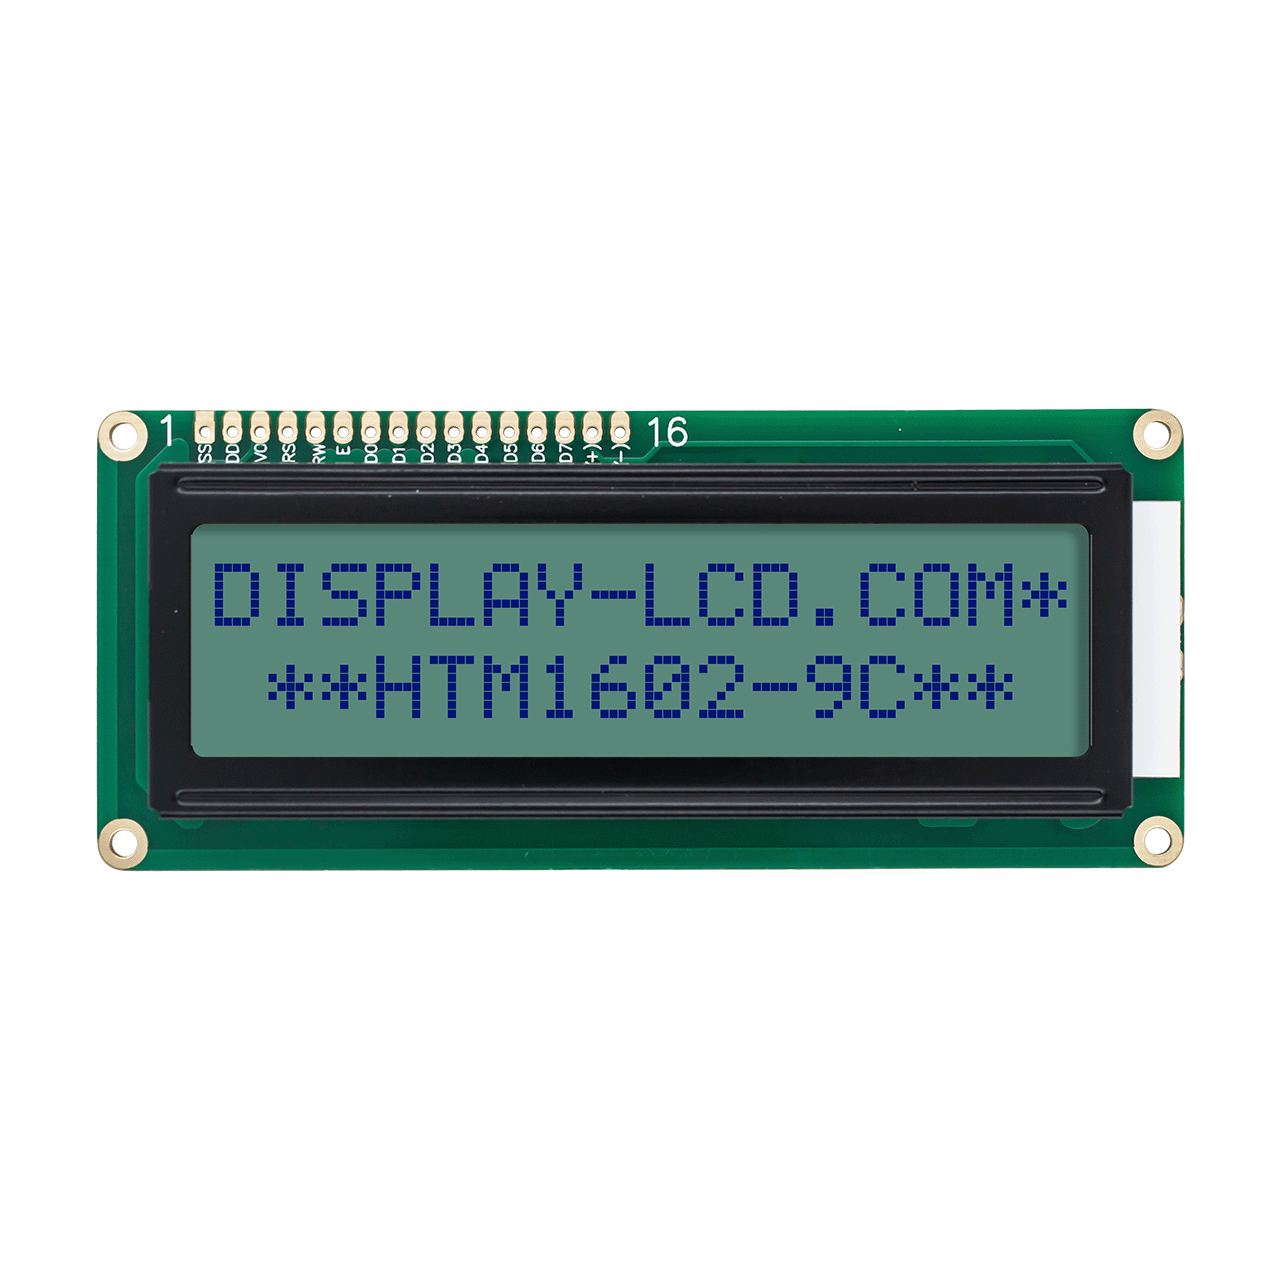 2X16 Character LCD Display | STN+ Gray Display with yellow/green Side Backlight-Arduino